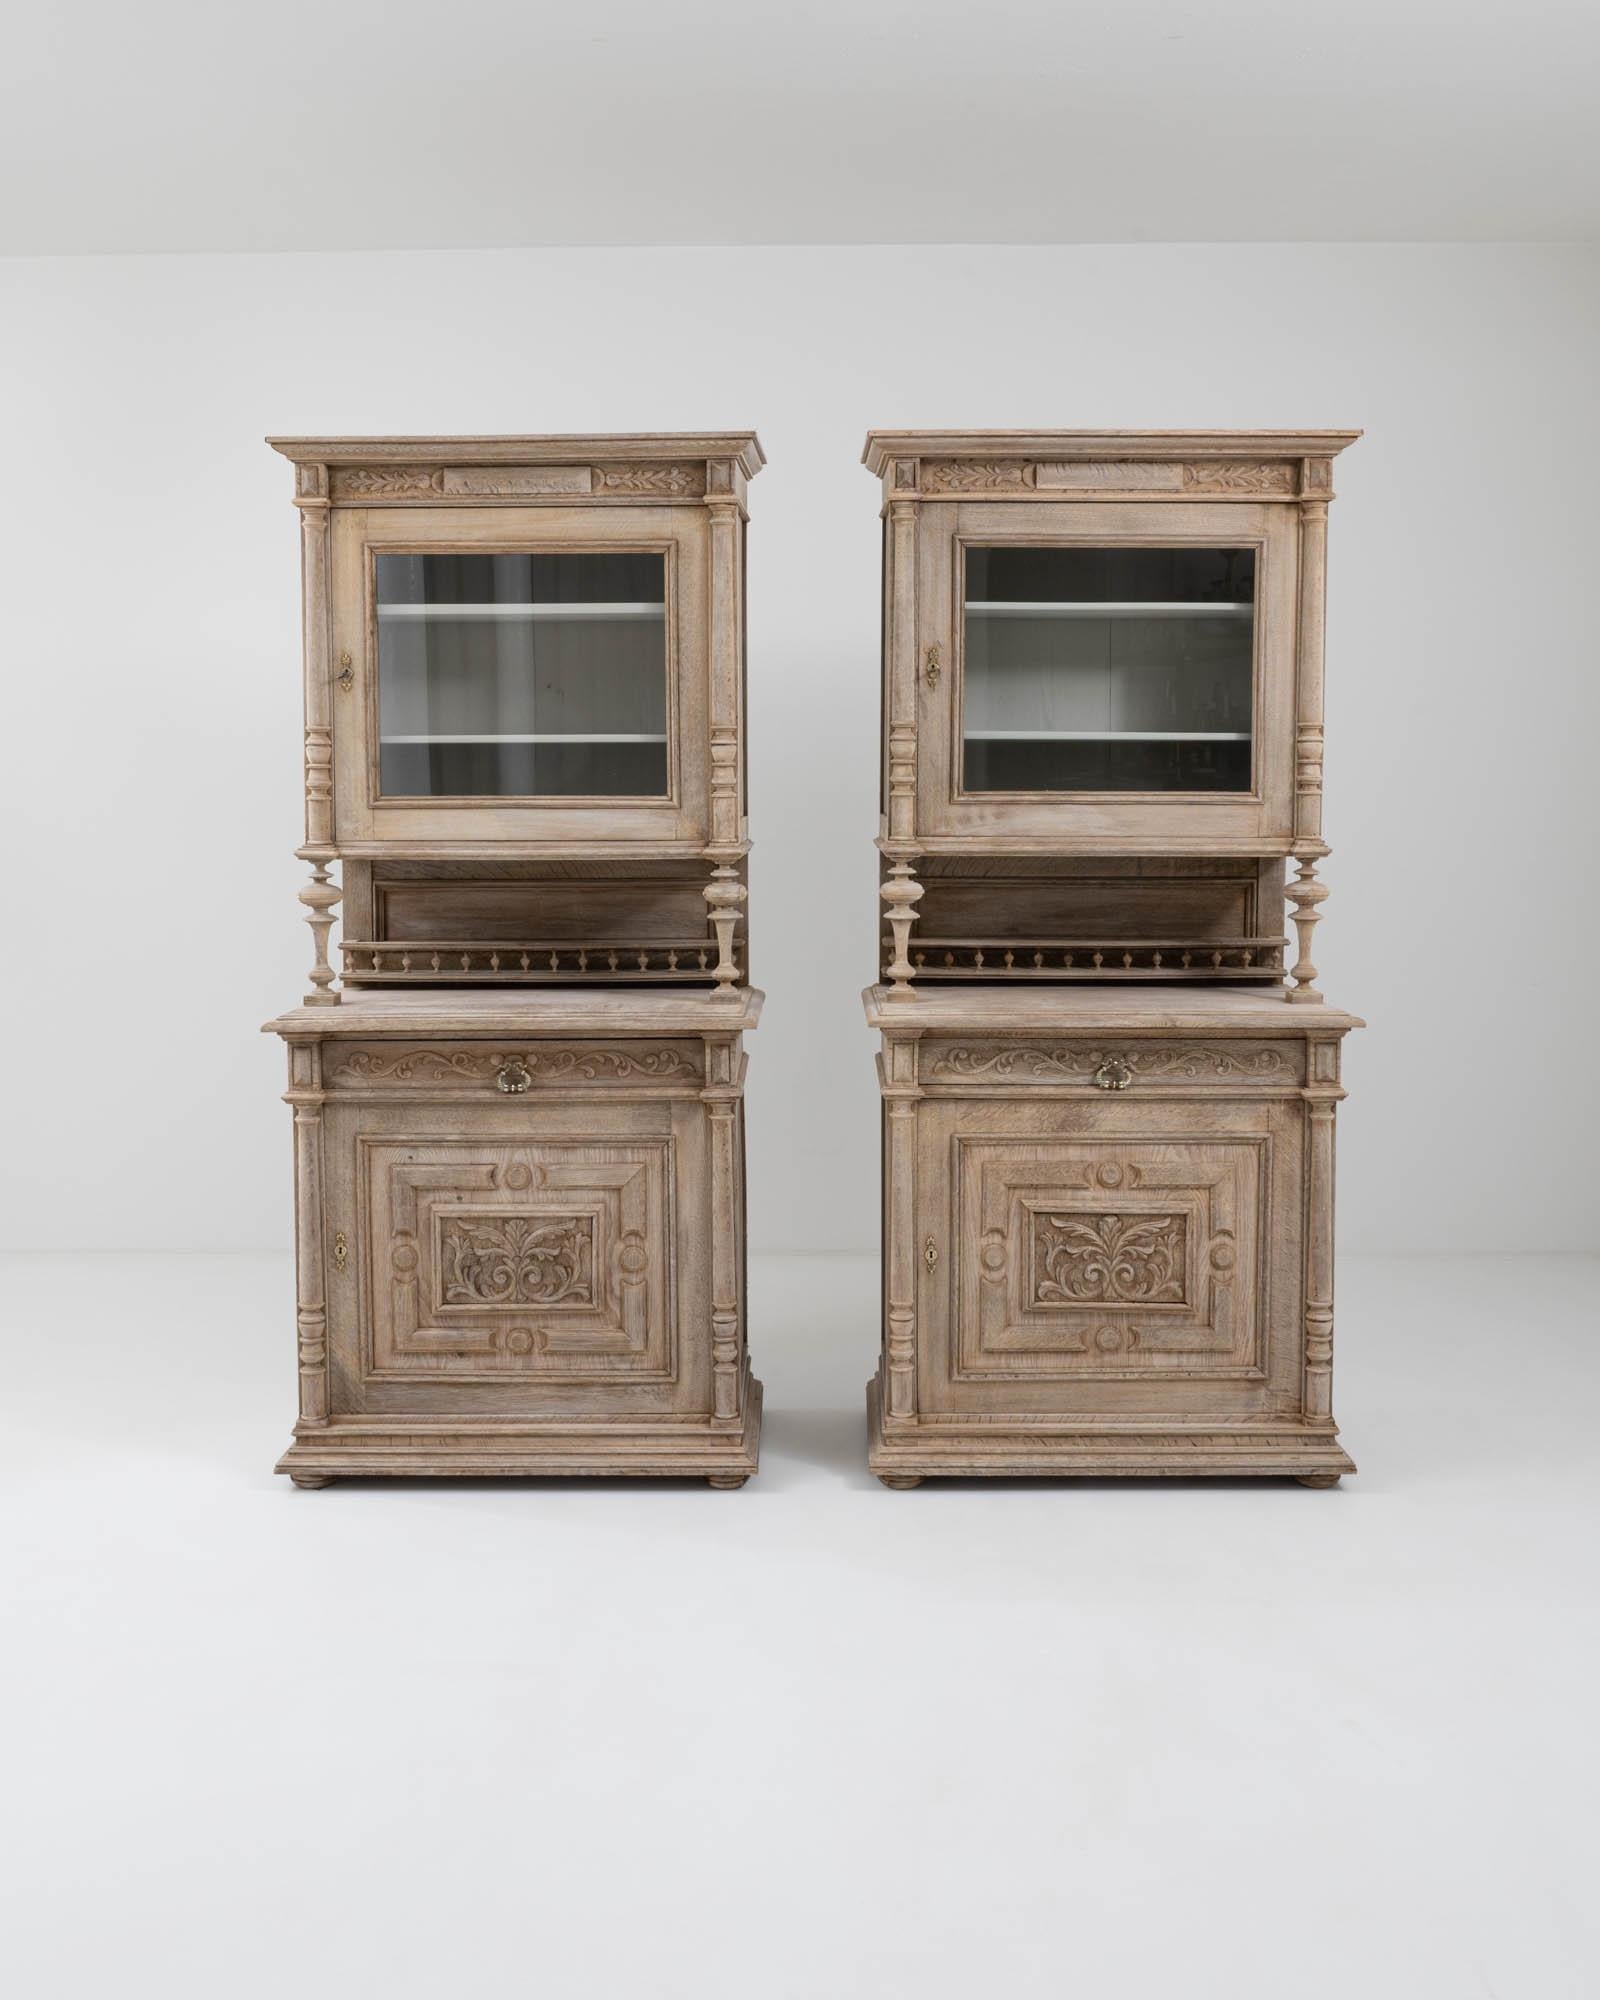 These pair of 1900s oak Belgian vitrines à deux corps flaunt the eclectic richness of their decorative elements. These display cabinets boast neoclassical shaped cornices, embossed foliate carvings, and masterfully crafted balusters; visually